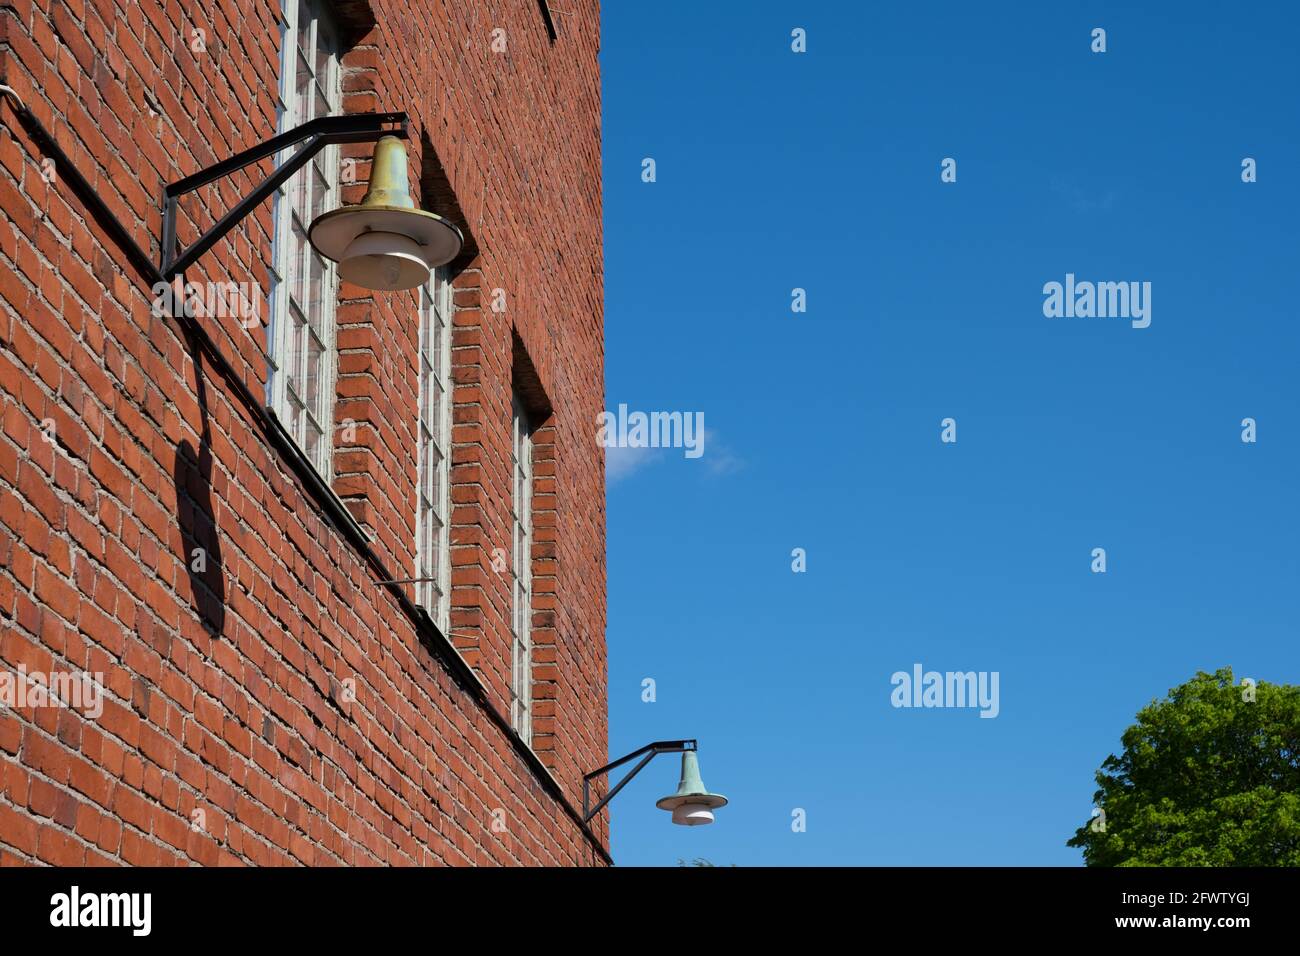 Helsinki / Finland - MAY 22, 2021: A vintage gas powered lamppost hanging on a red brick wall. Stock Photo